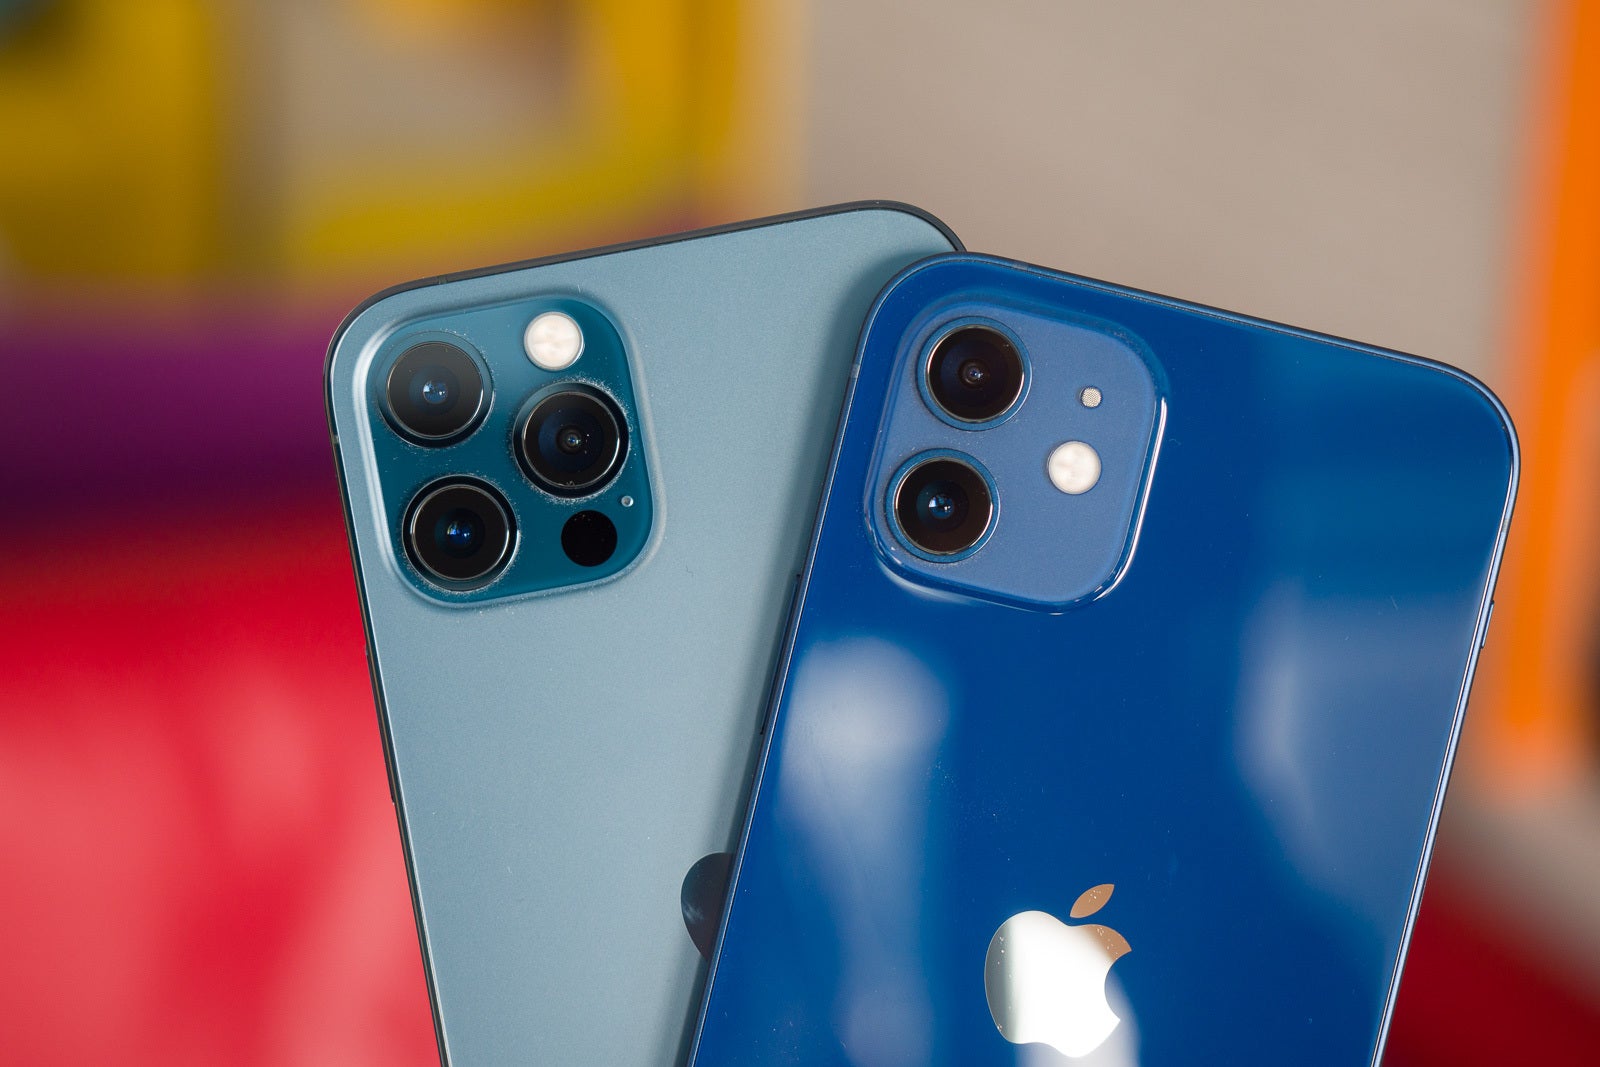 Samsung has overtaken Apple in the US for the first time since 2017